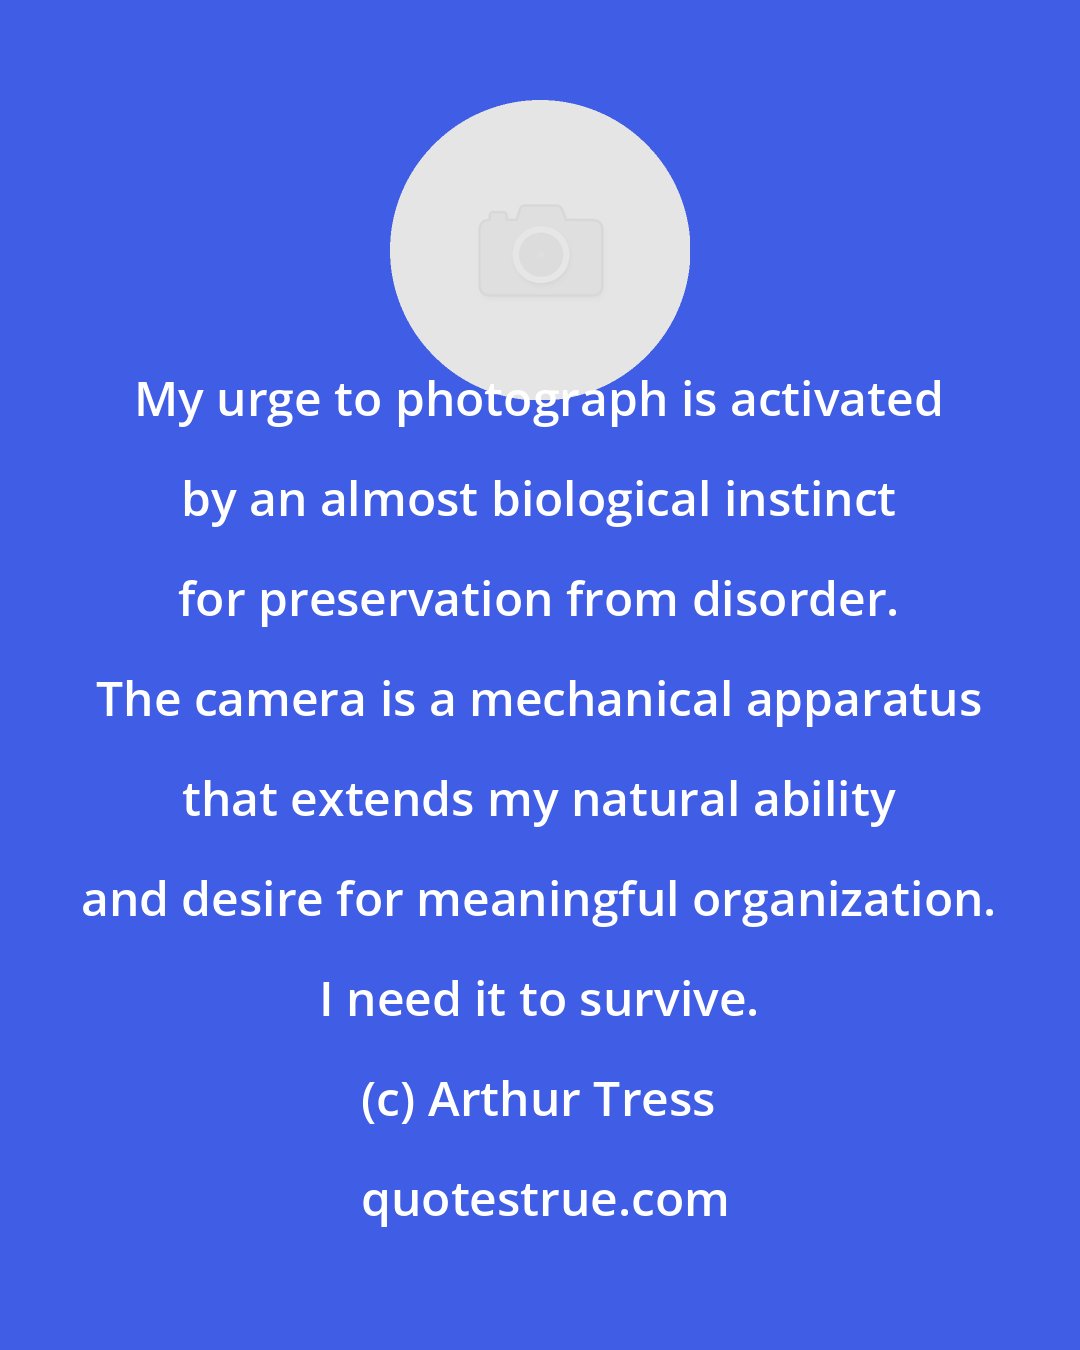 Arthur Tress: My urge to photograph is activated by an almost biological instinct for preservation from disorder. The camera is a mechanical apparatus that extends my natural ability and desire for meaningful organization. I need it to survive.